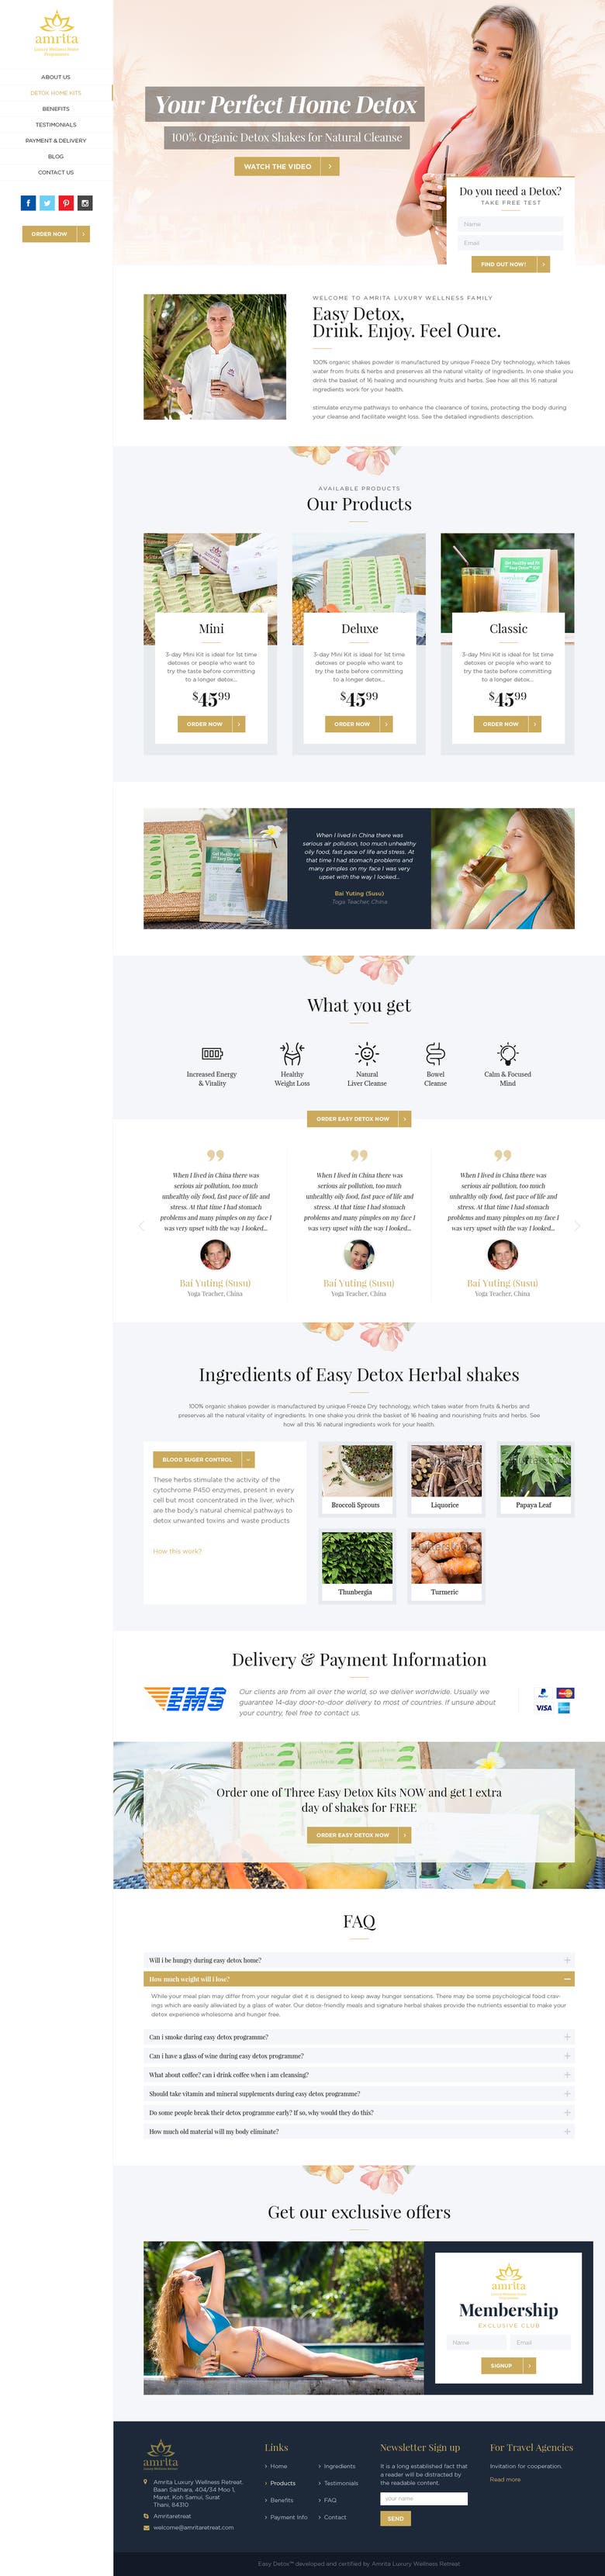 Landing Page and Product detail page layout